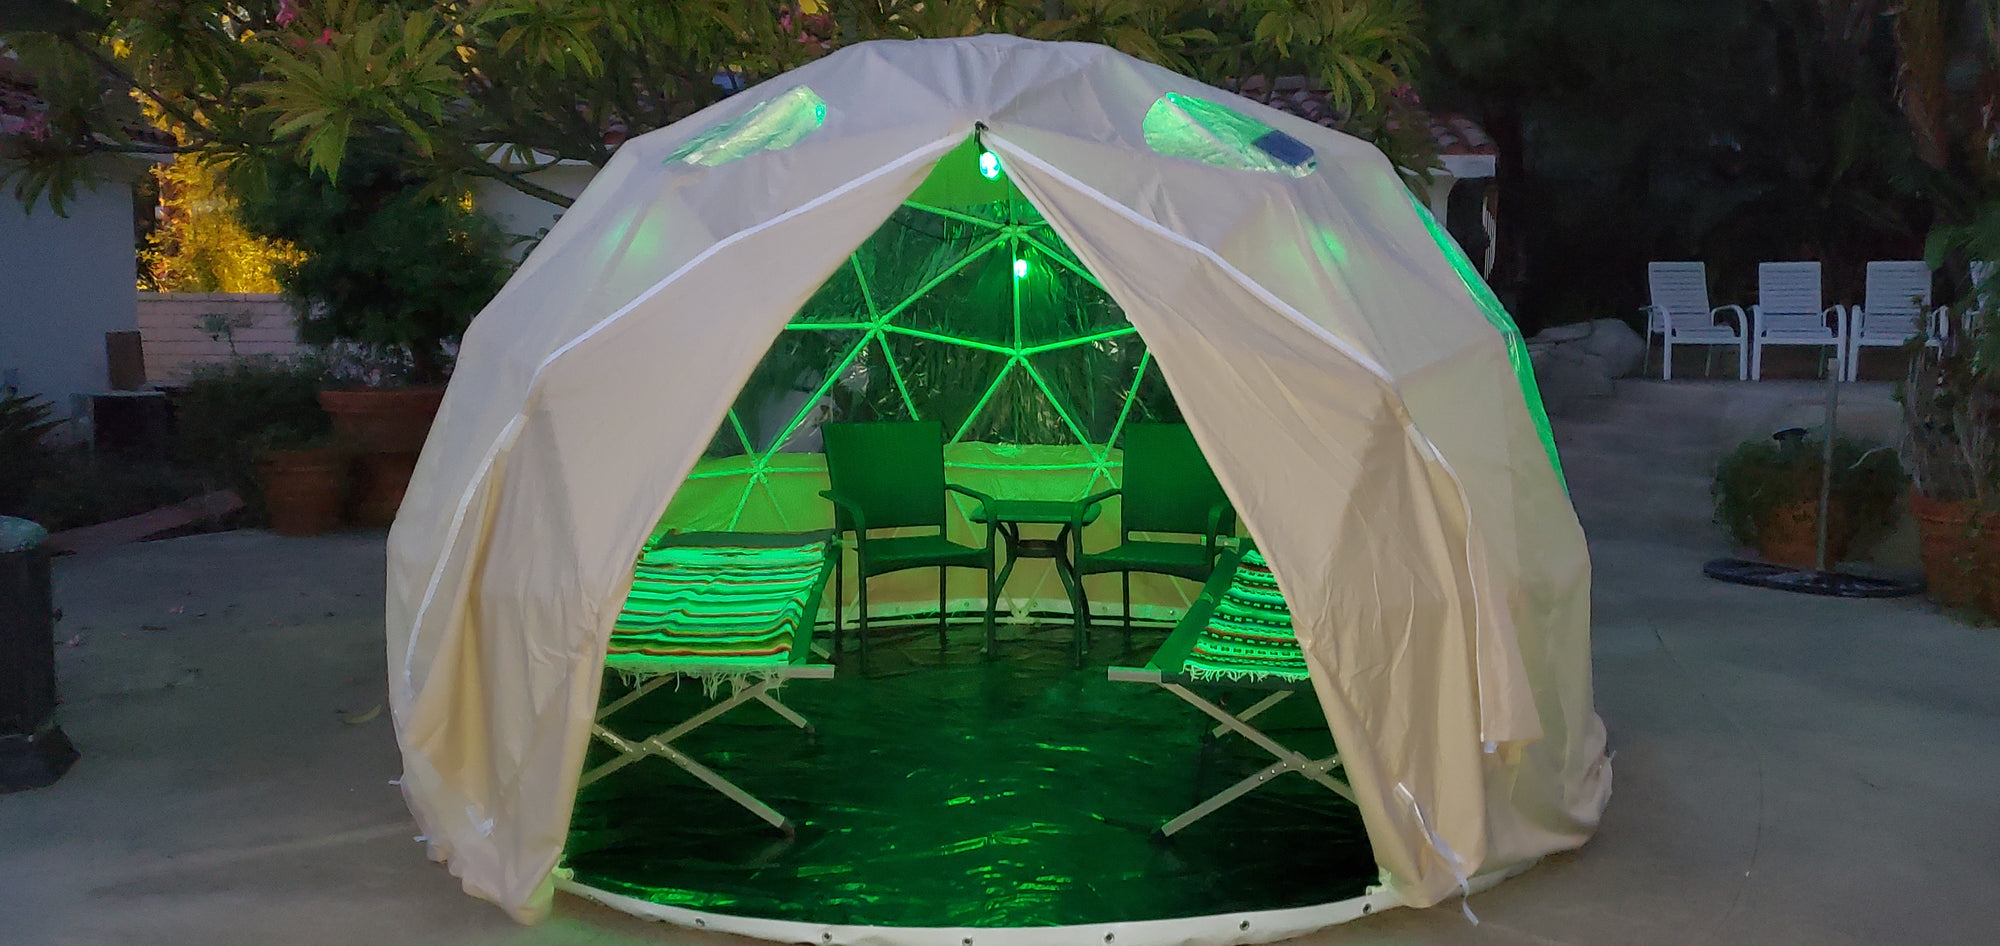 Introducing the Sonostar Mini-Glamping Dome